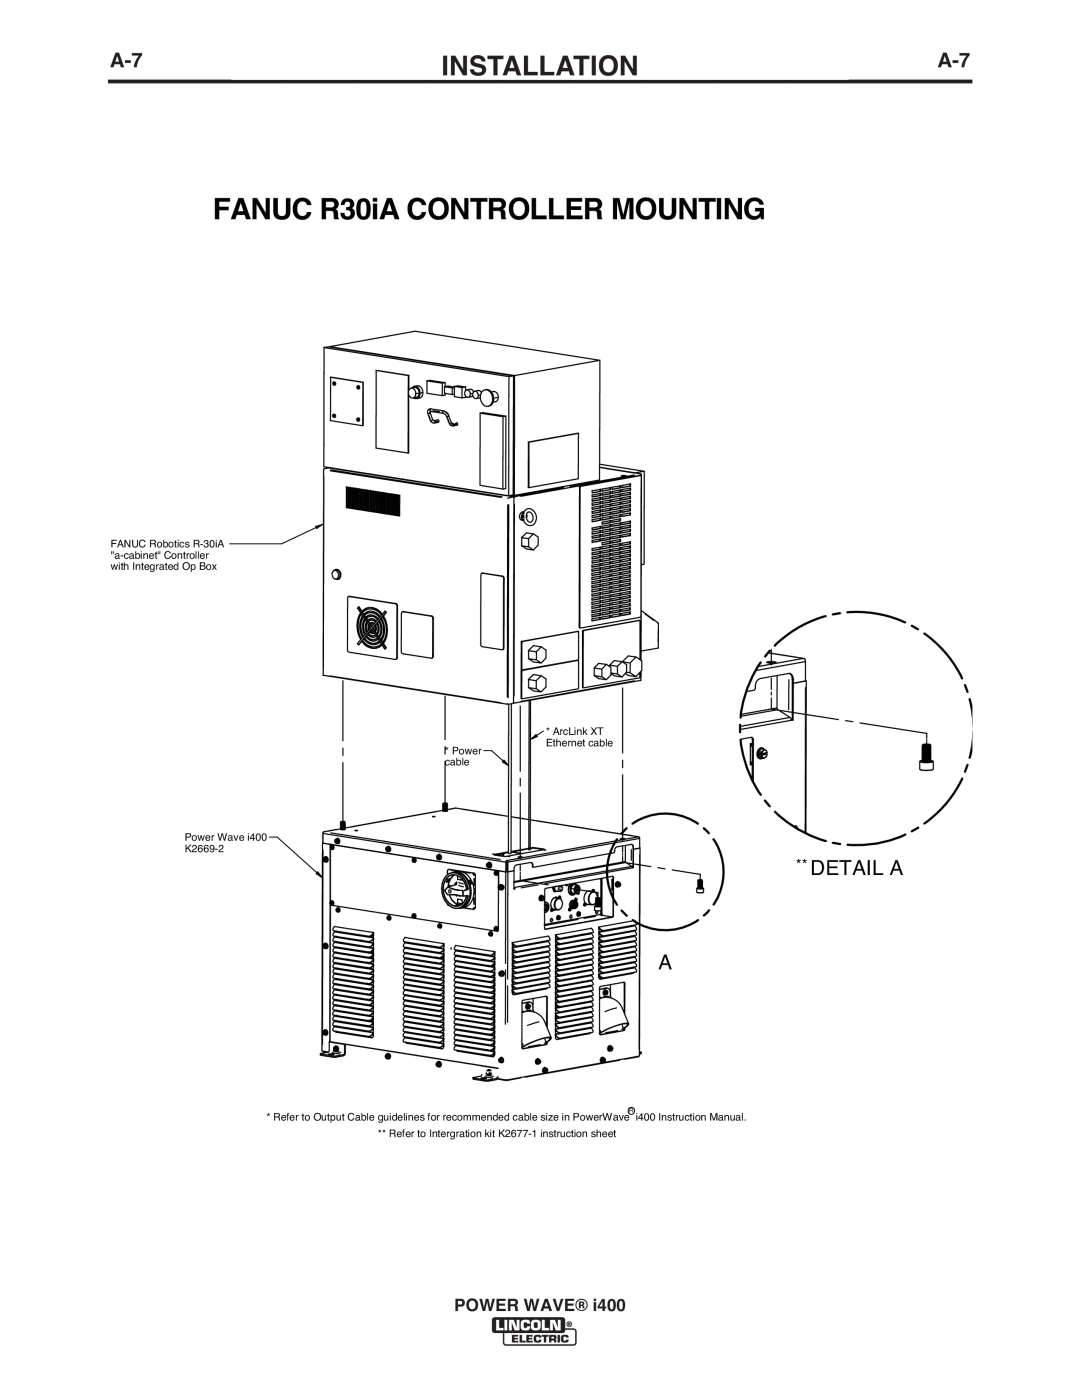 Lincoln Electric IM986 manual FANUC R30iA CONTROLLER MOUNTING, Installation, Detail A A 